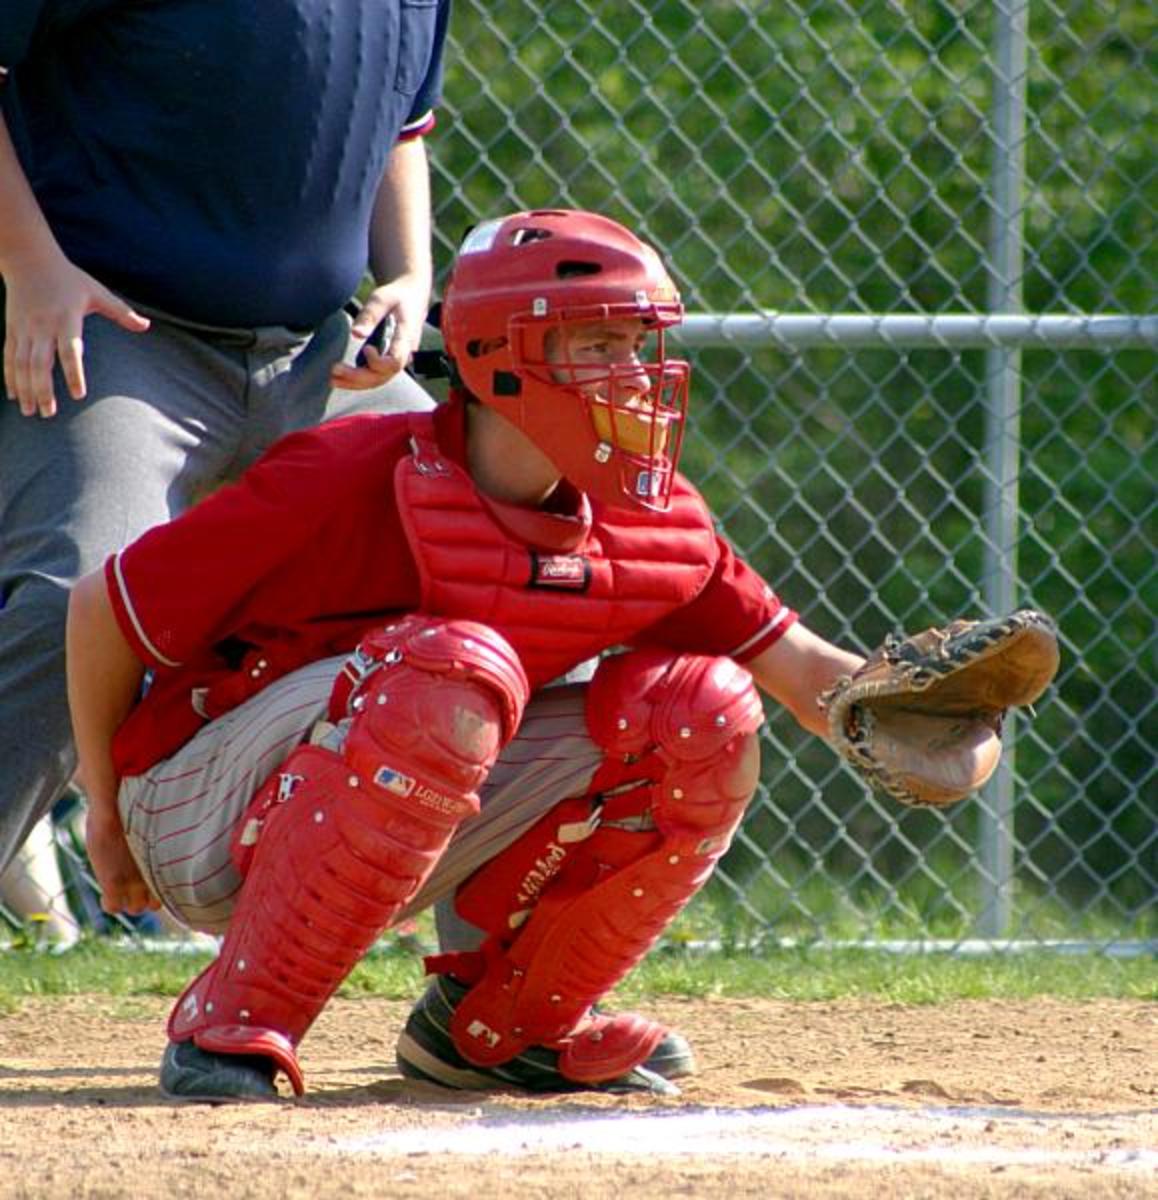 The number one cause of death in youth baseball is commotio cordis.